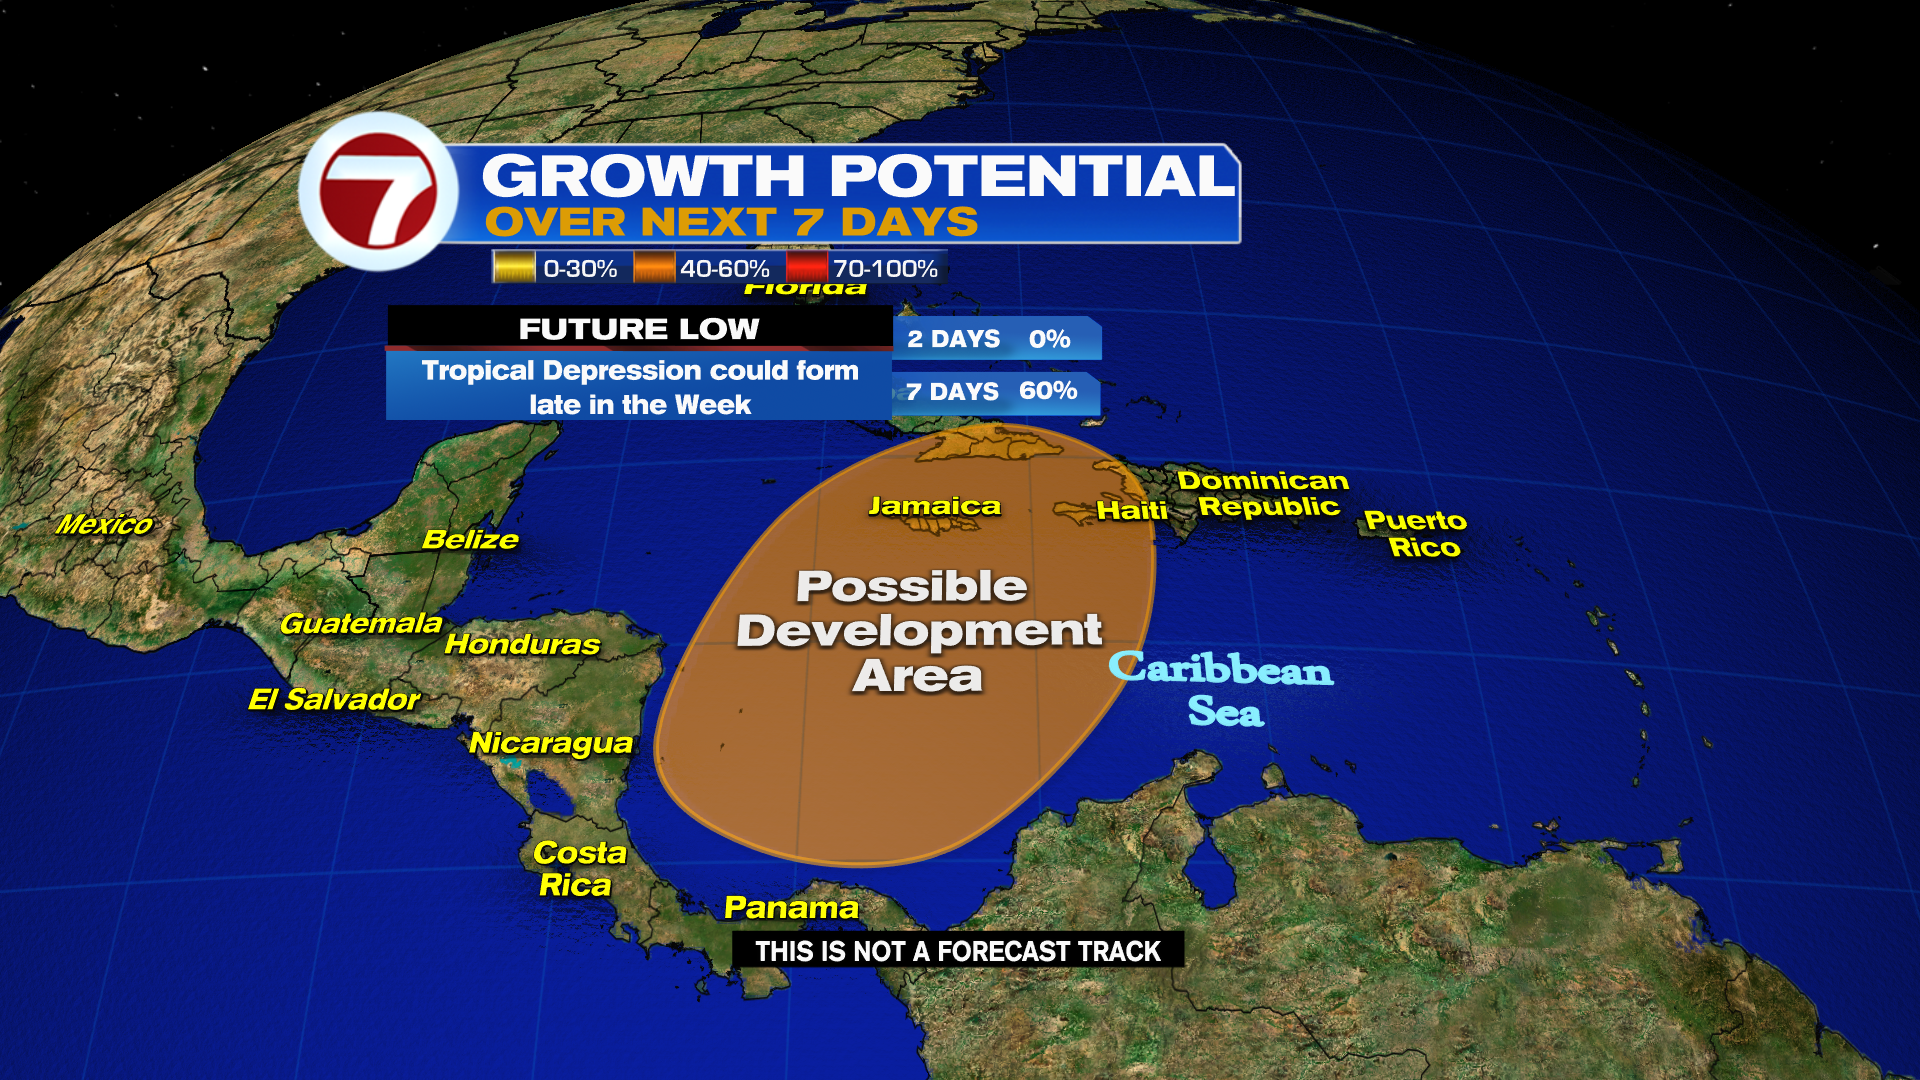 https://wsvn.com/wp-content/uploads/sites/2/2023/11/Vince-Formation-Potential-Areas-KML.png